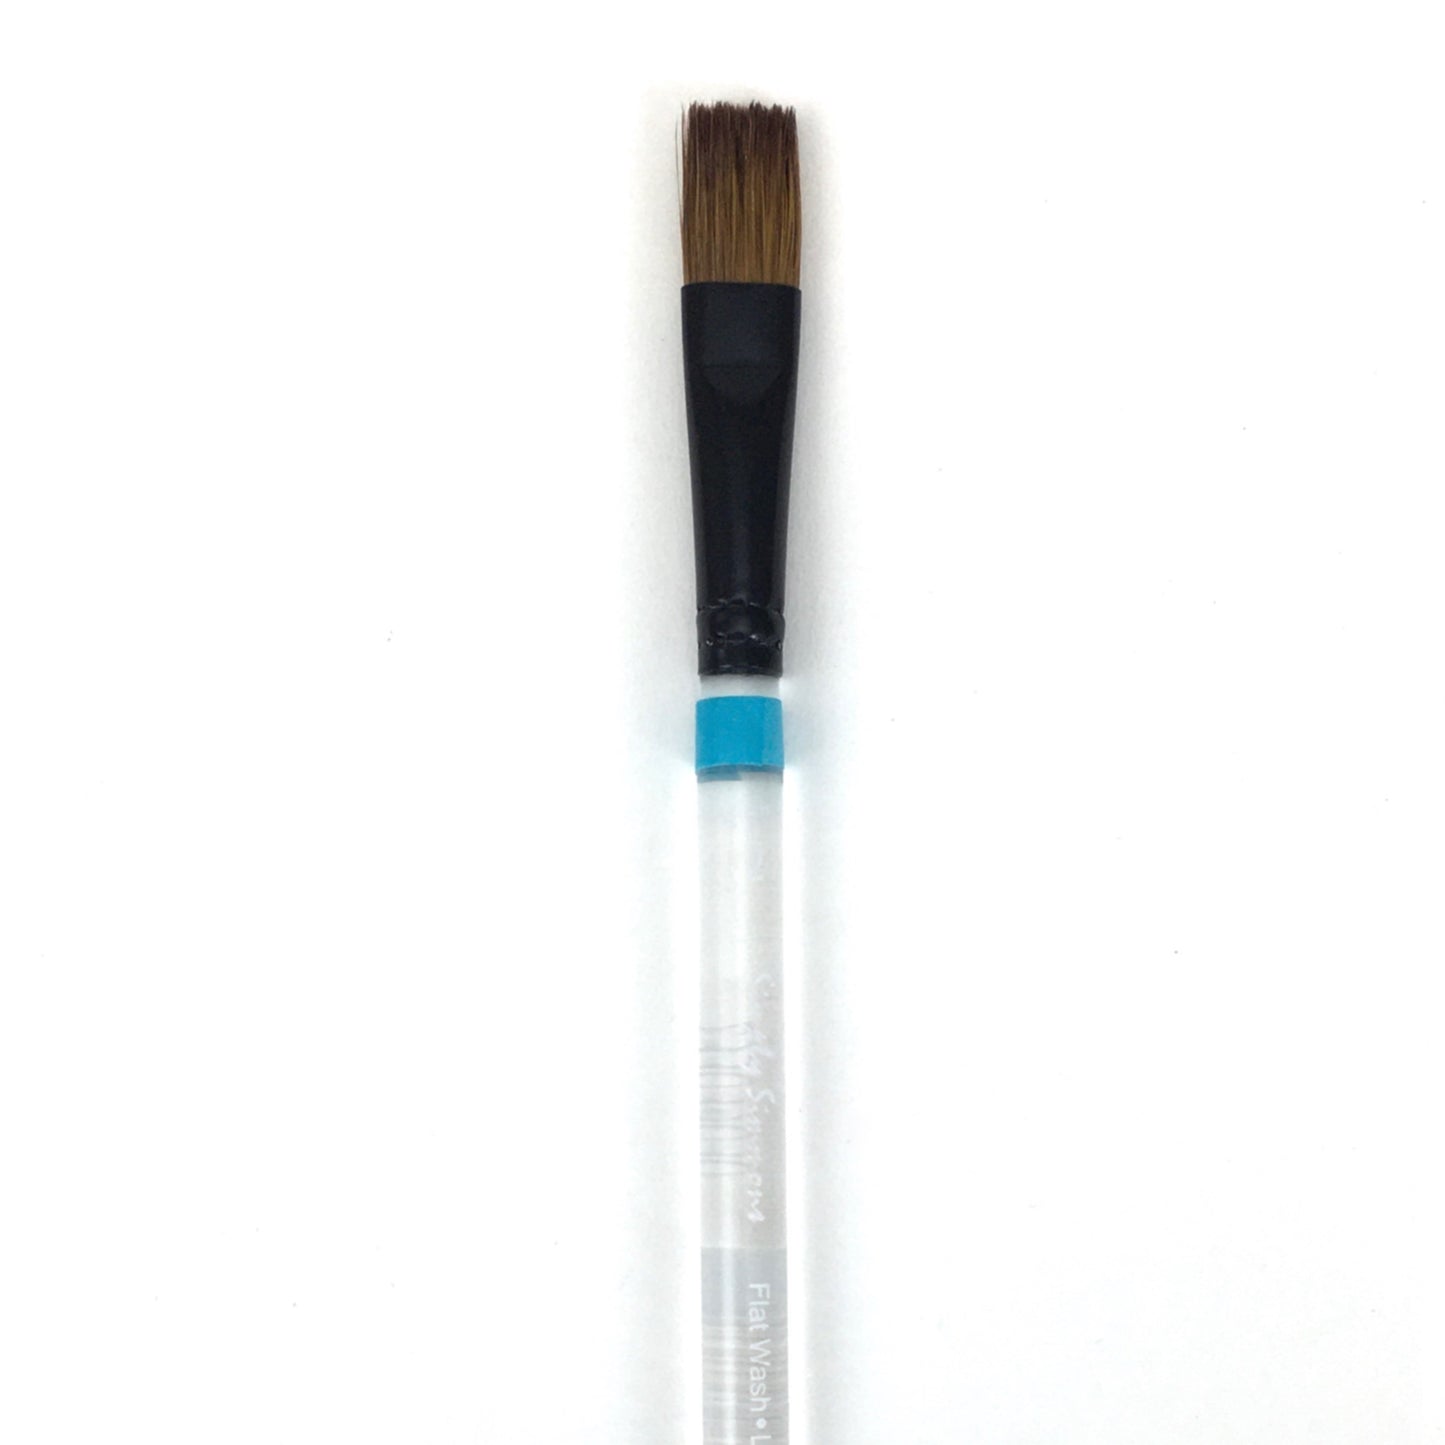 Simply Simmons Watercolor Brush - Short Handle - Flat Wash / - 1/2 inches / - natural by Robert Simmons - K. A. Artist Shop